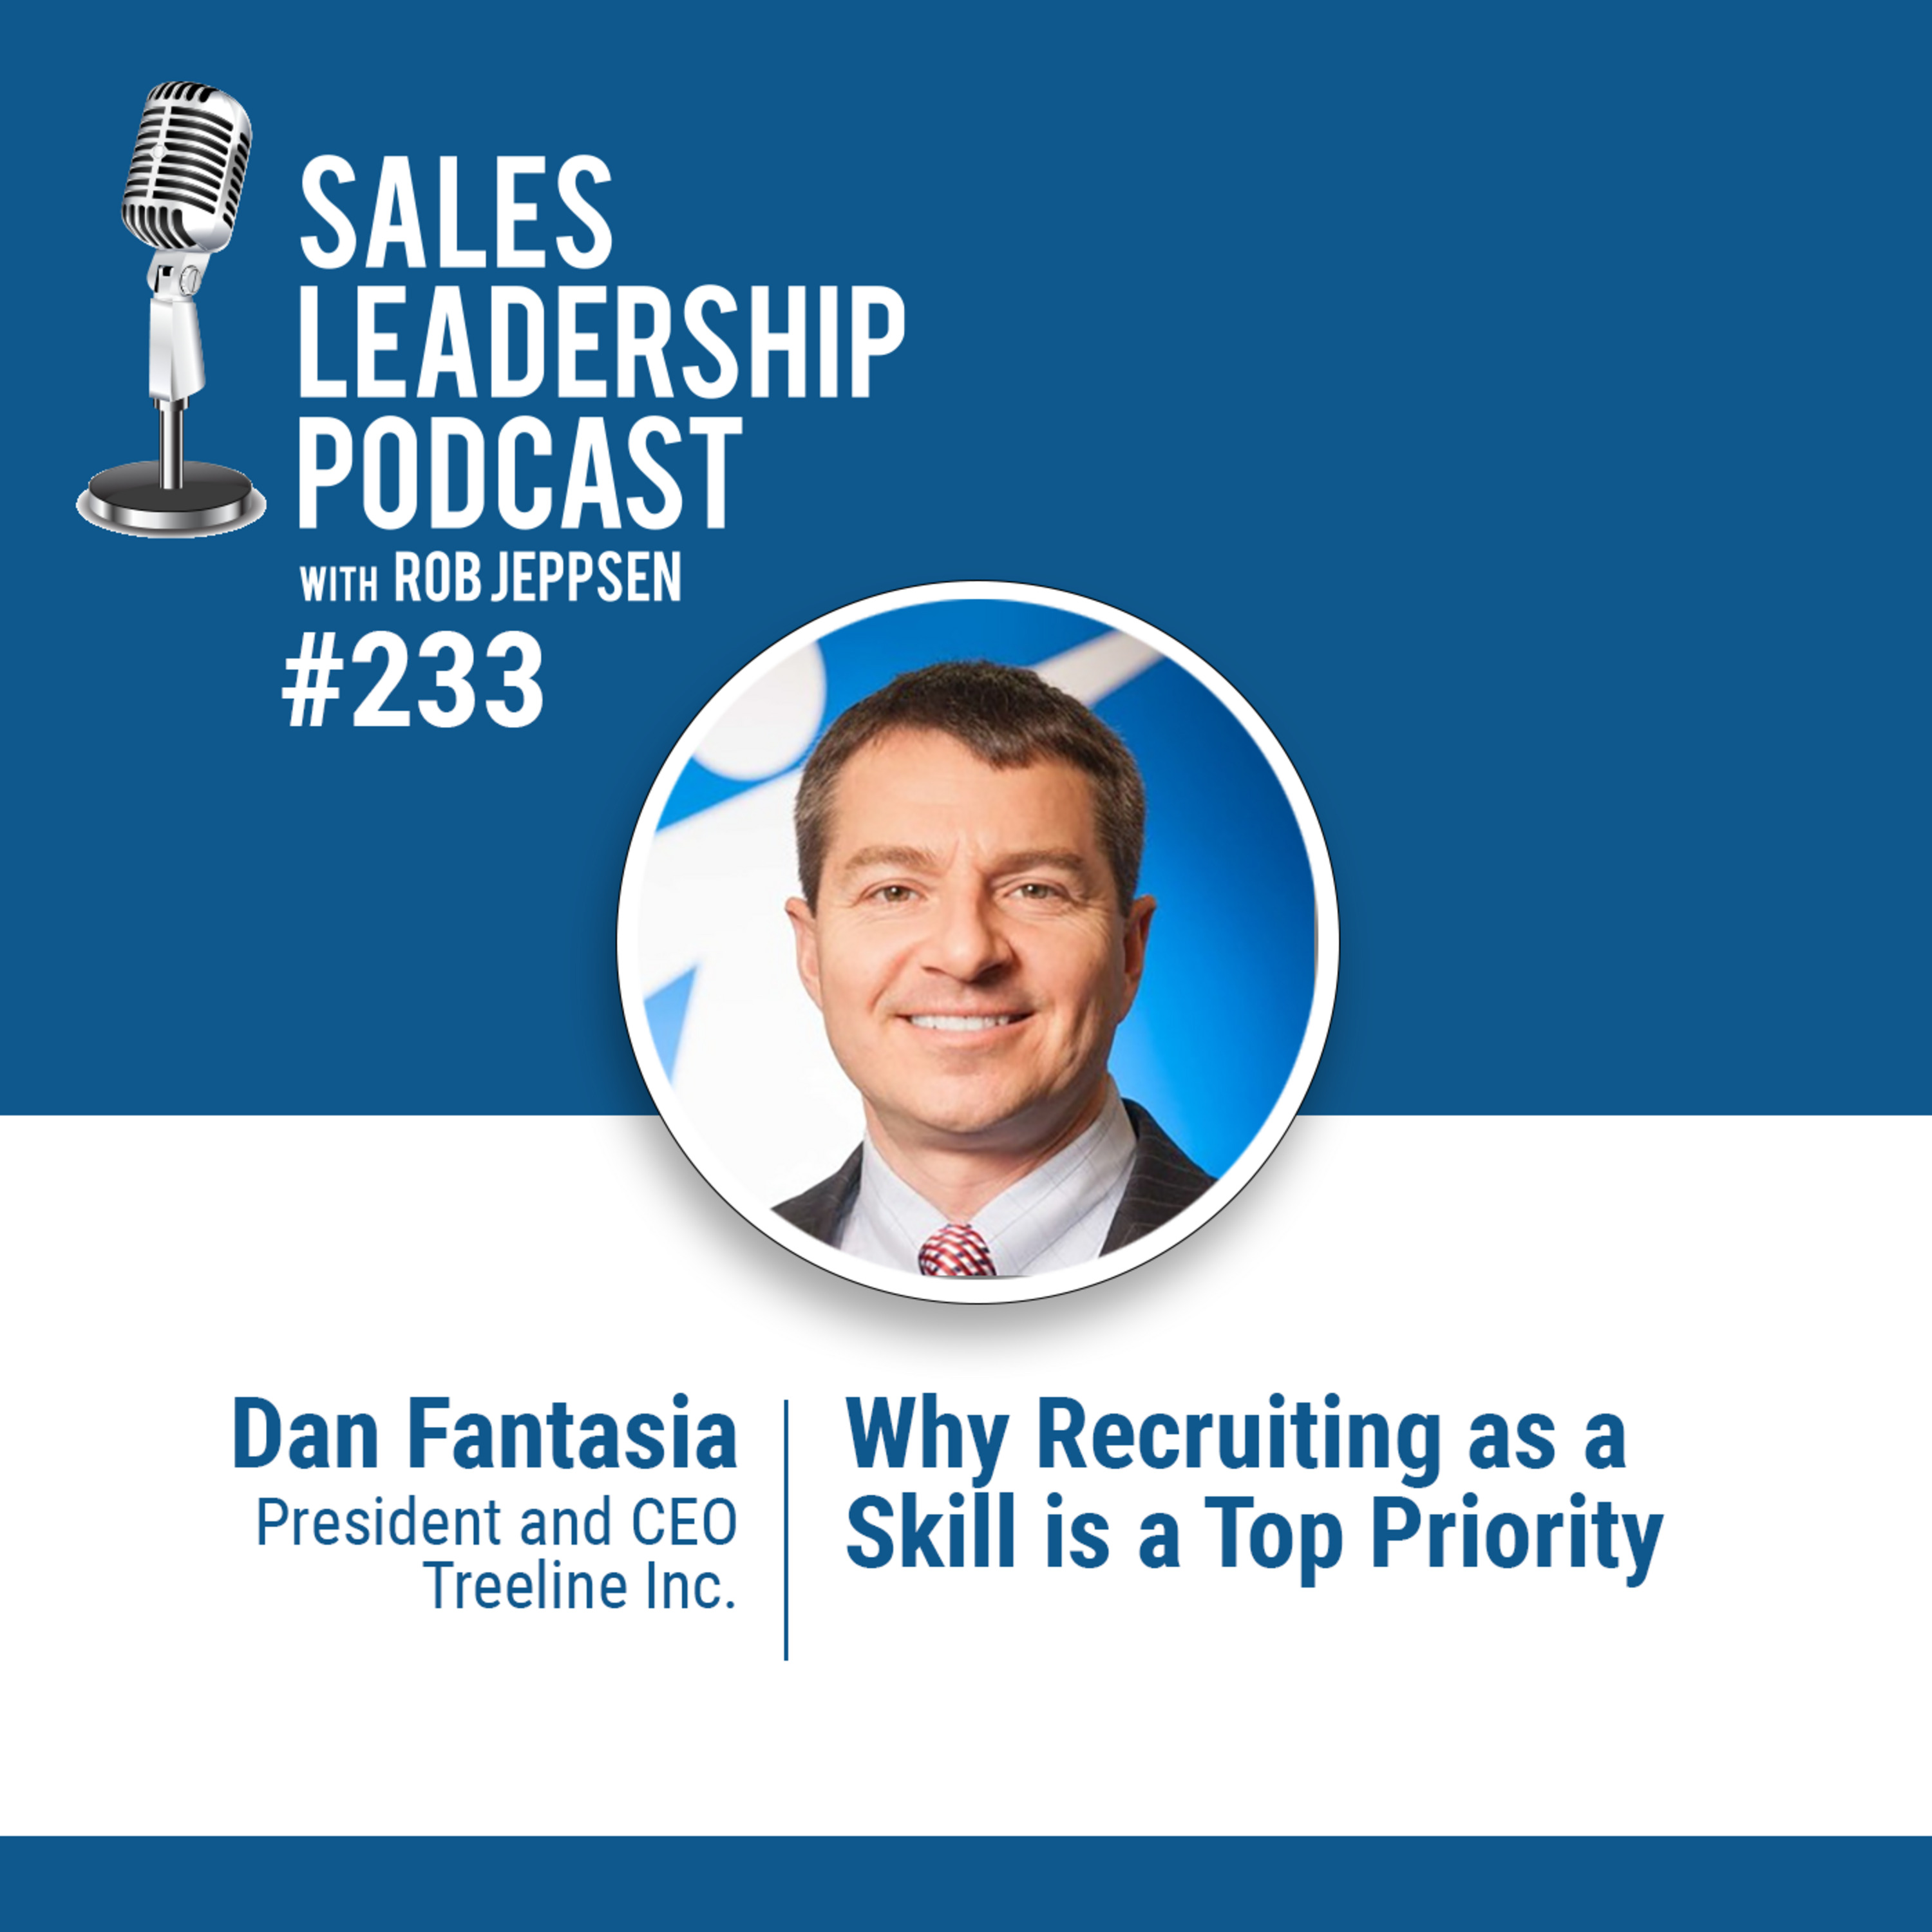 Episode 234: Dan Fantasia, President and CEO of Treeline Recruiting: Why Recruiting as a Skill is a Top Priority